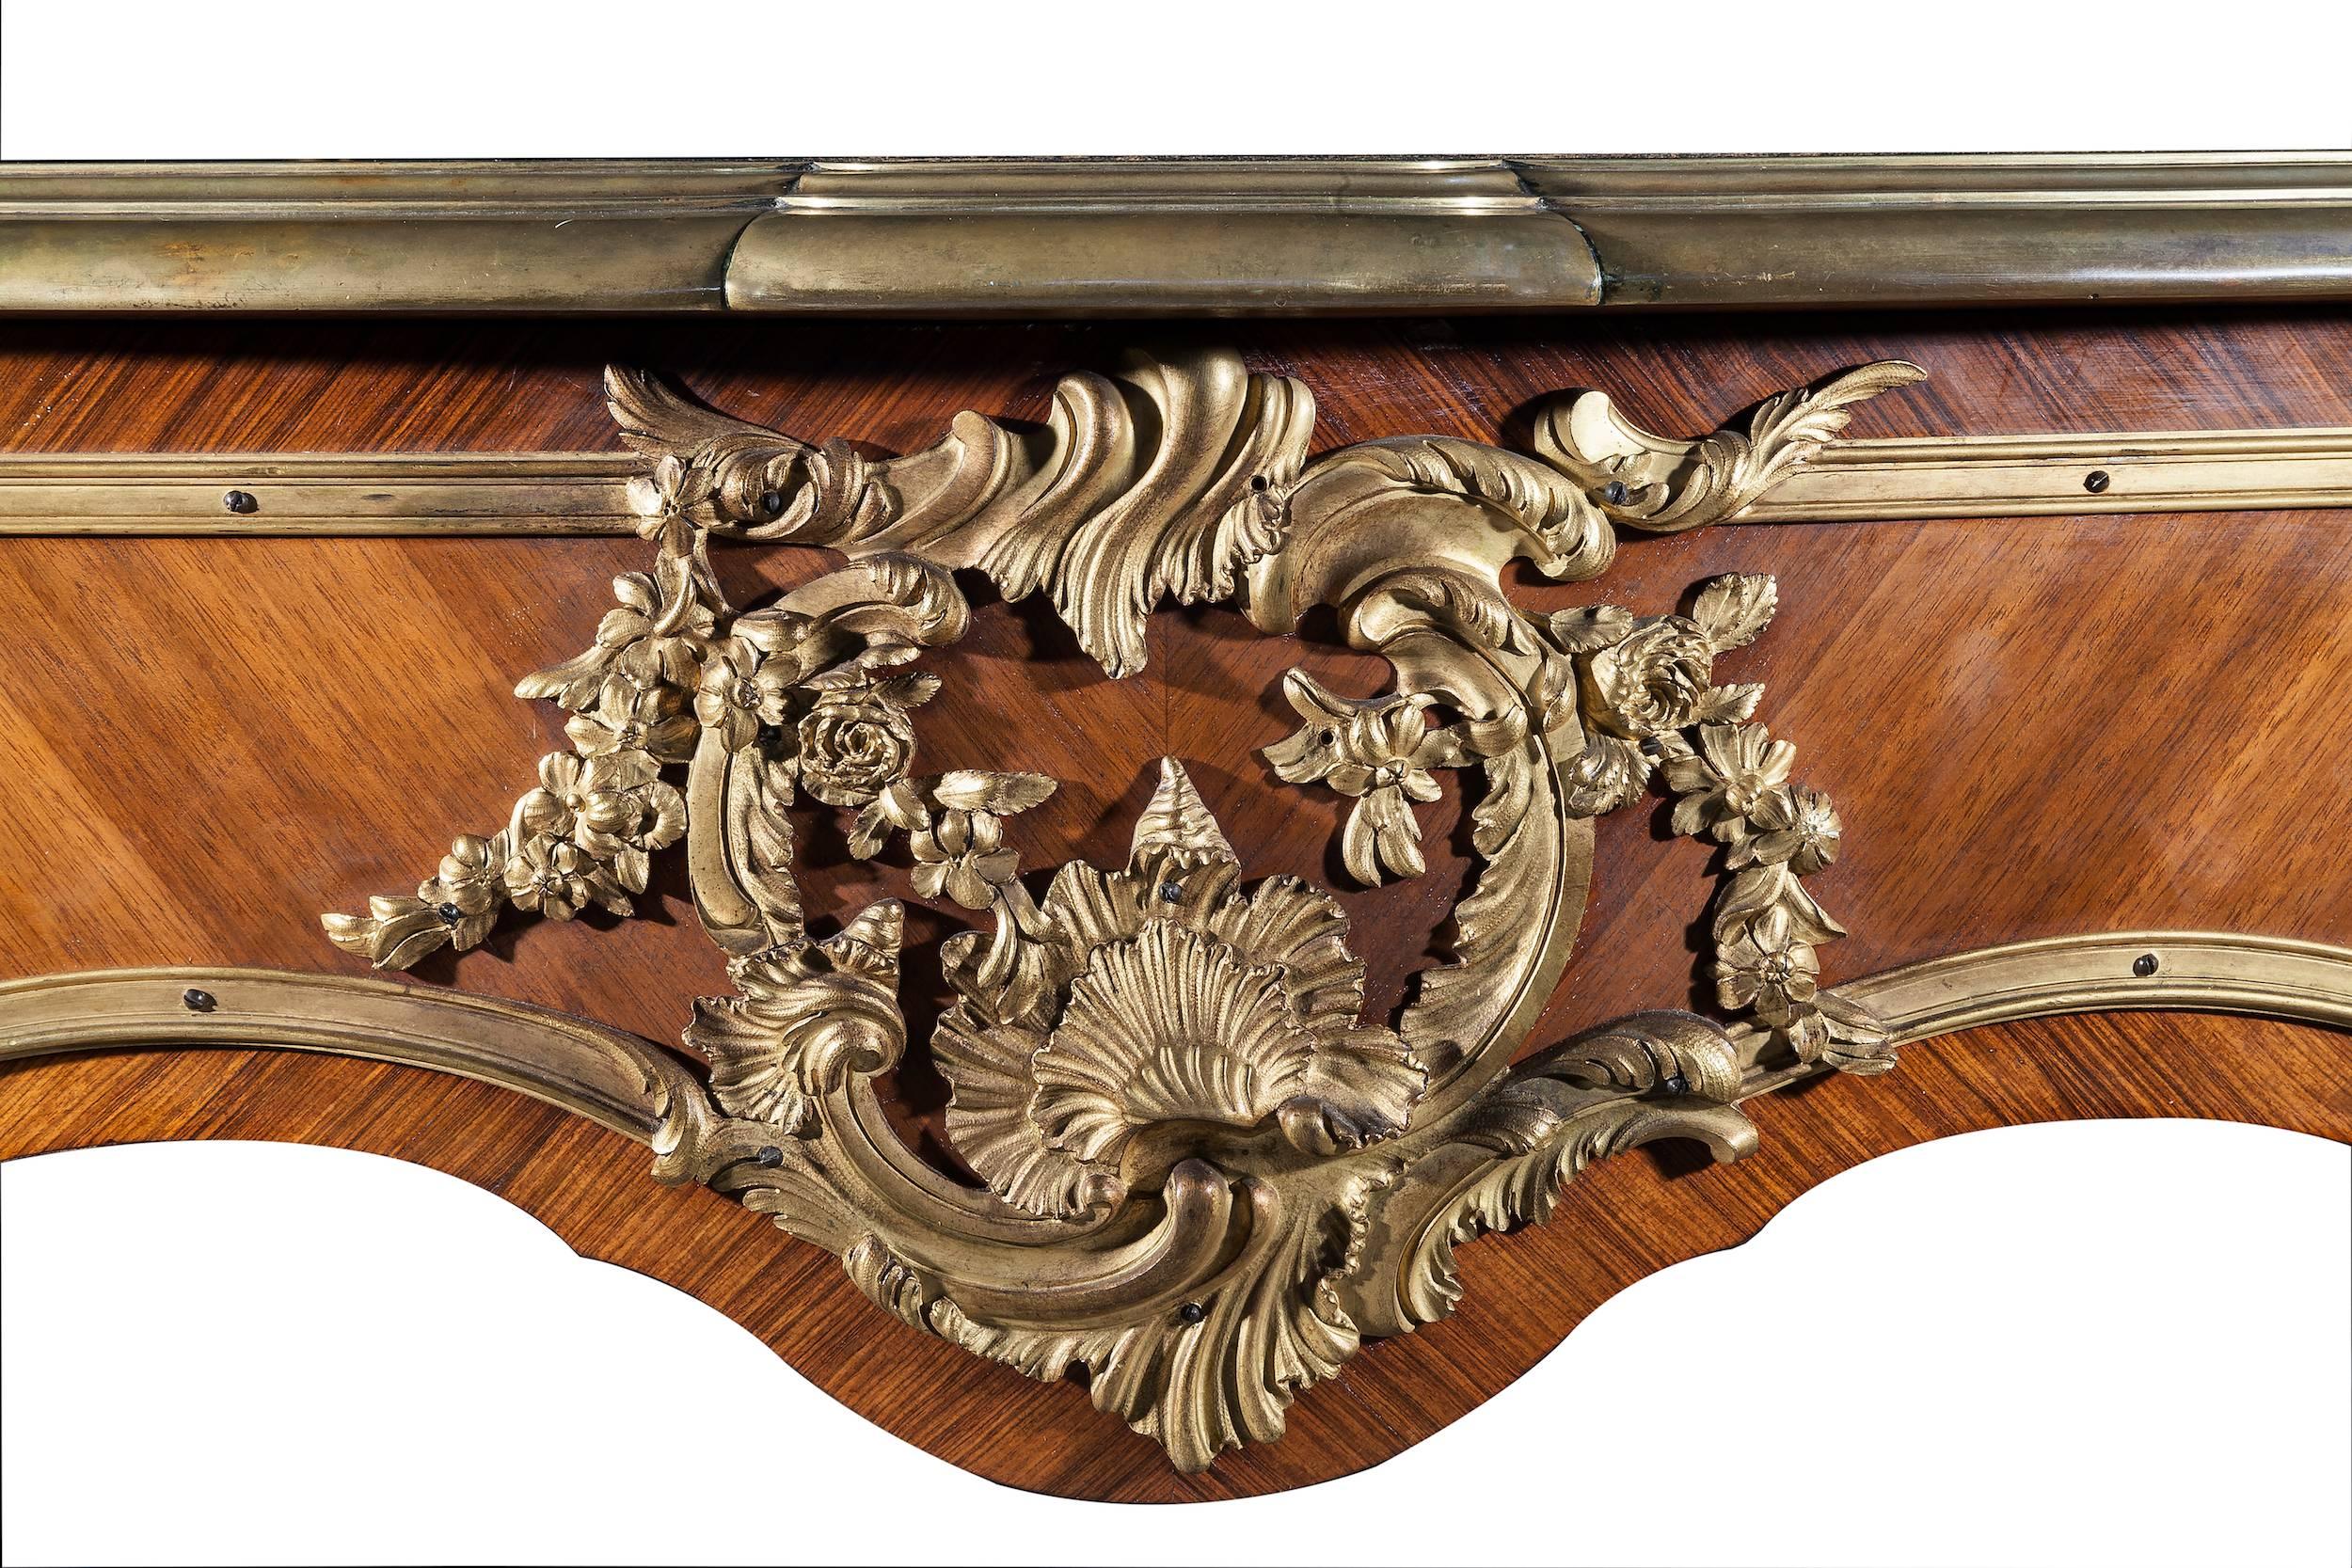 This bureau plat is veneered in bois de rose and decorated by friezes in gilded bronze.
Stamped: P. Sormani, 10 rue Charlot

The top is contoured, covered in brown leather and sharpened by a gilt bronze edge with plant decorations at the corners.